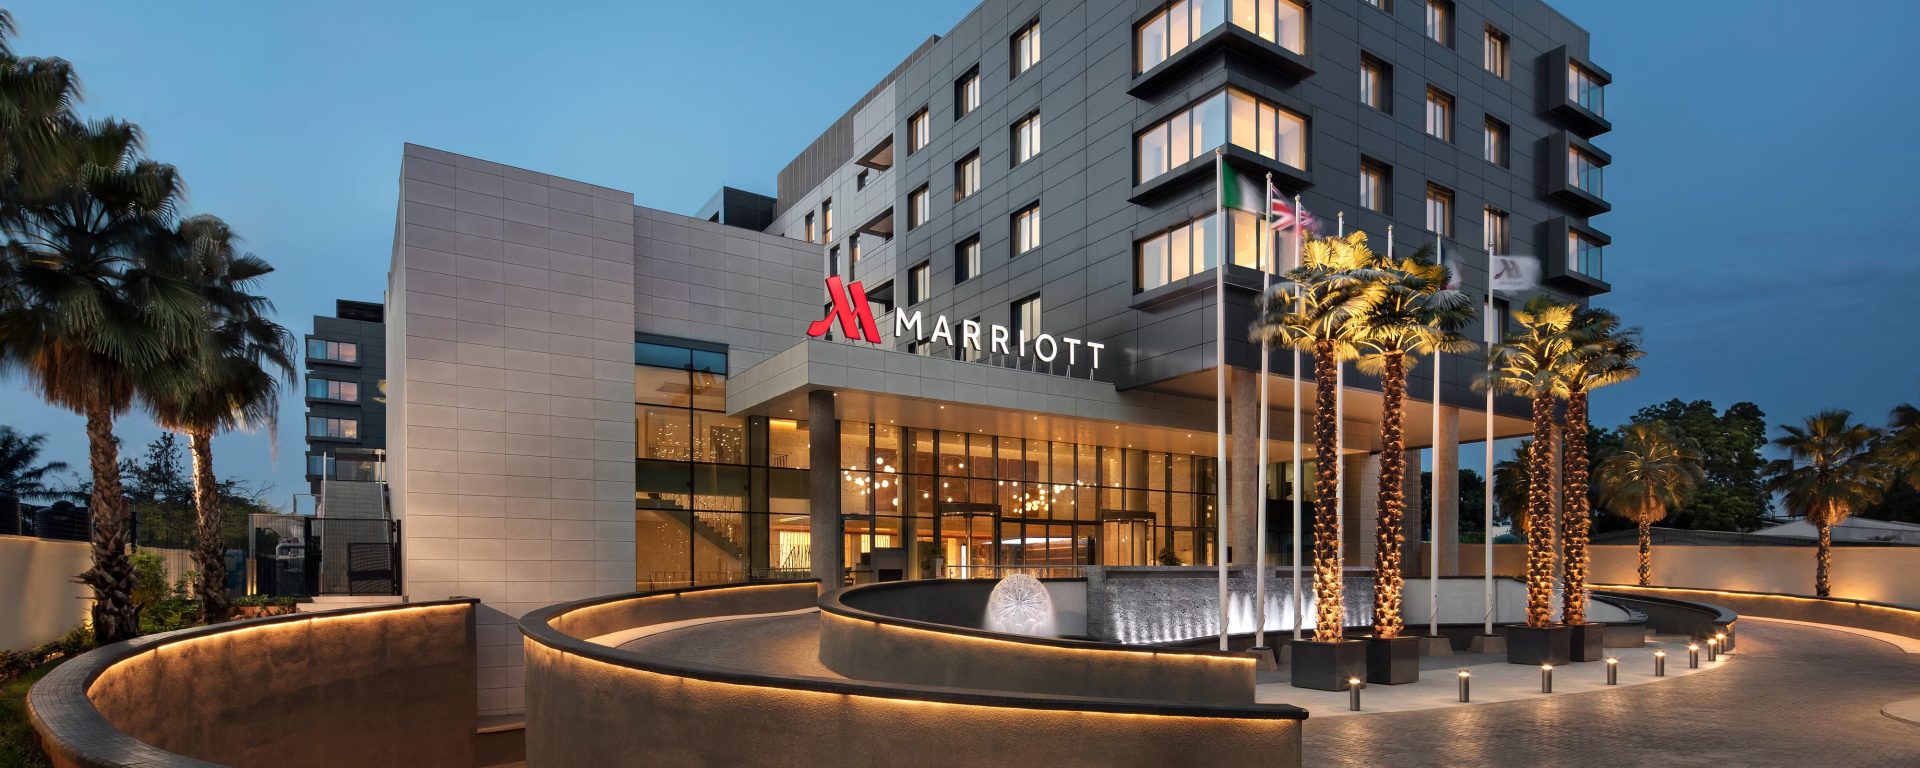 Marriott International, EV Connect, electric vehicle charging, hospitality industry, sustainability, turnkey solutions, EV charging stations,hotel EV charging,Marriott hotel EV charging,do hotels have ev charging stations,do hotels have charging stations for electric cars